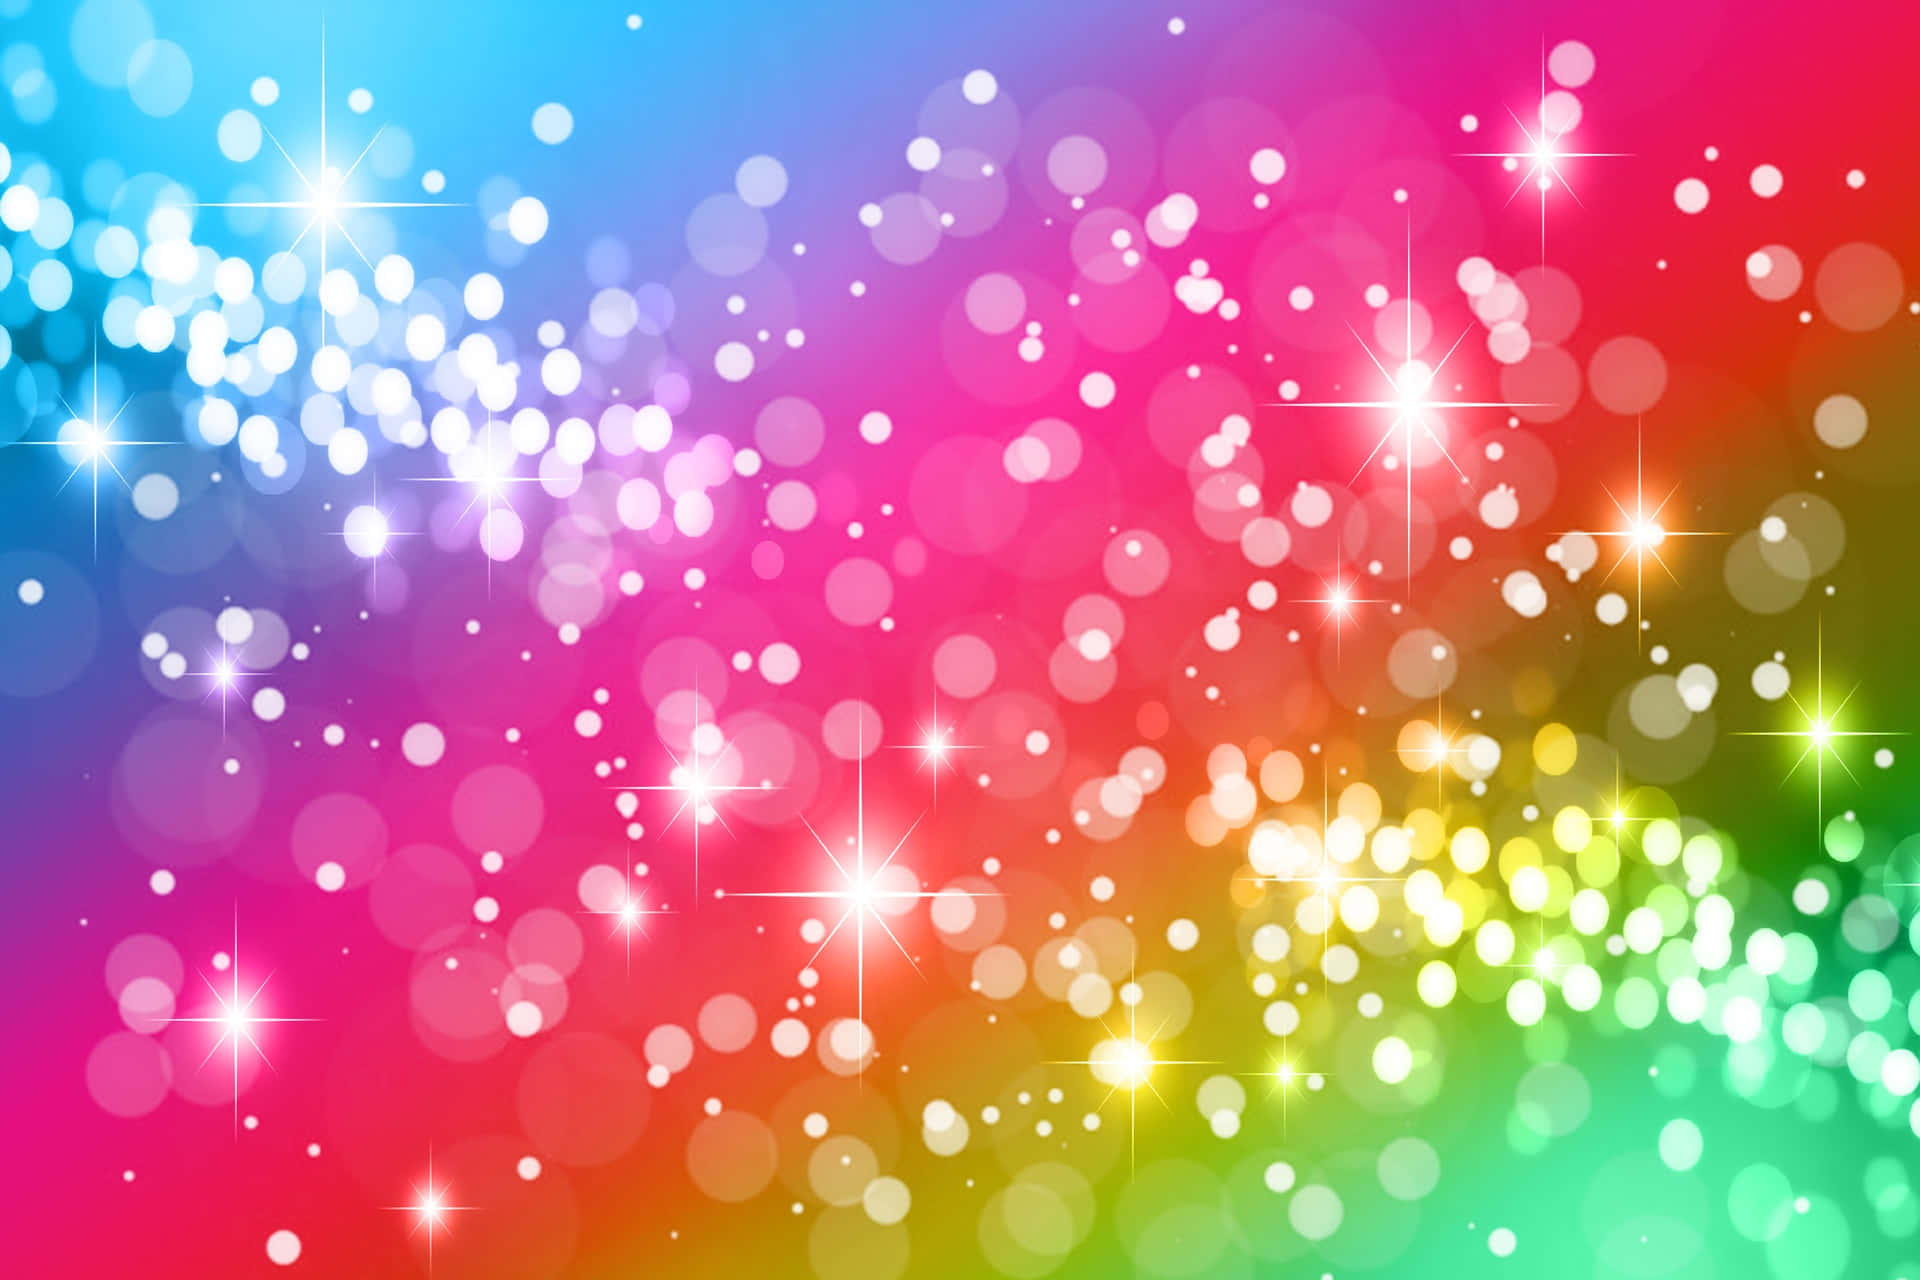 Background #wallpaper #Vector #Illustration #design #free #free_size  #charge_free #colorful #color rainbow pattern of stars, Stardust, stardust,  glitter, Milky Way, starry sky Stock Vector | Adobe Stock